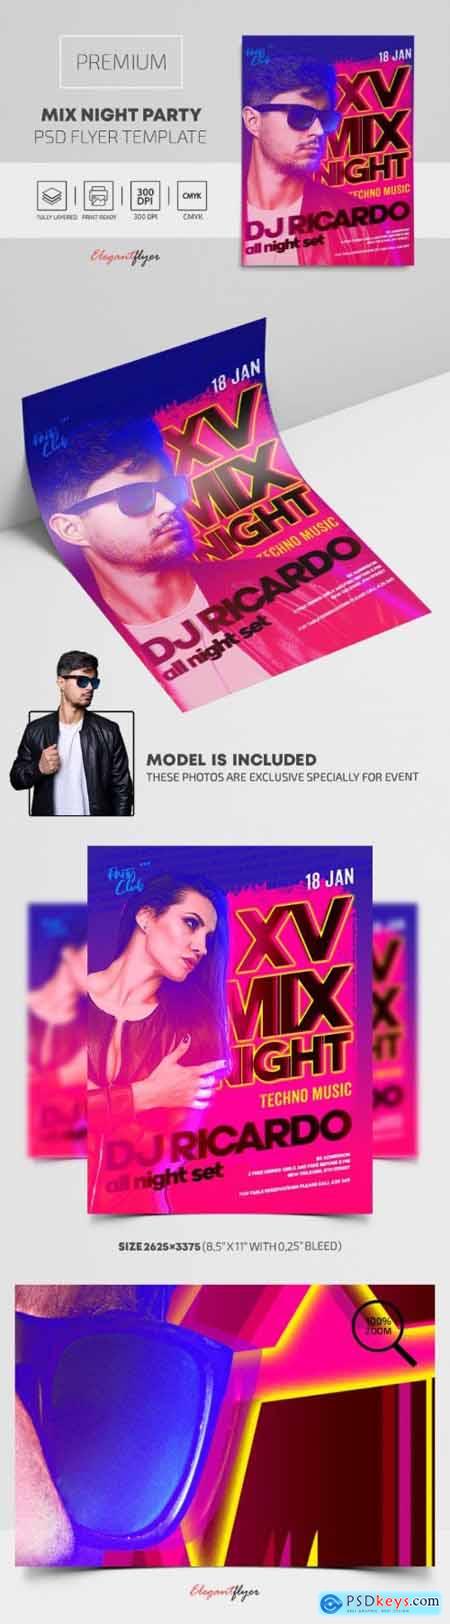 Mix Night Party  Premium PSD Flyer Template